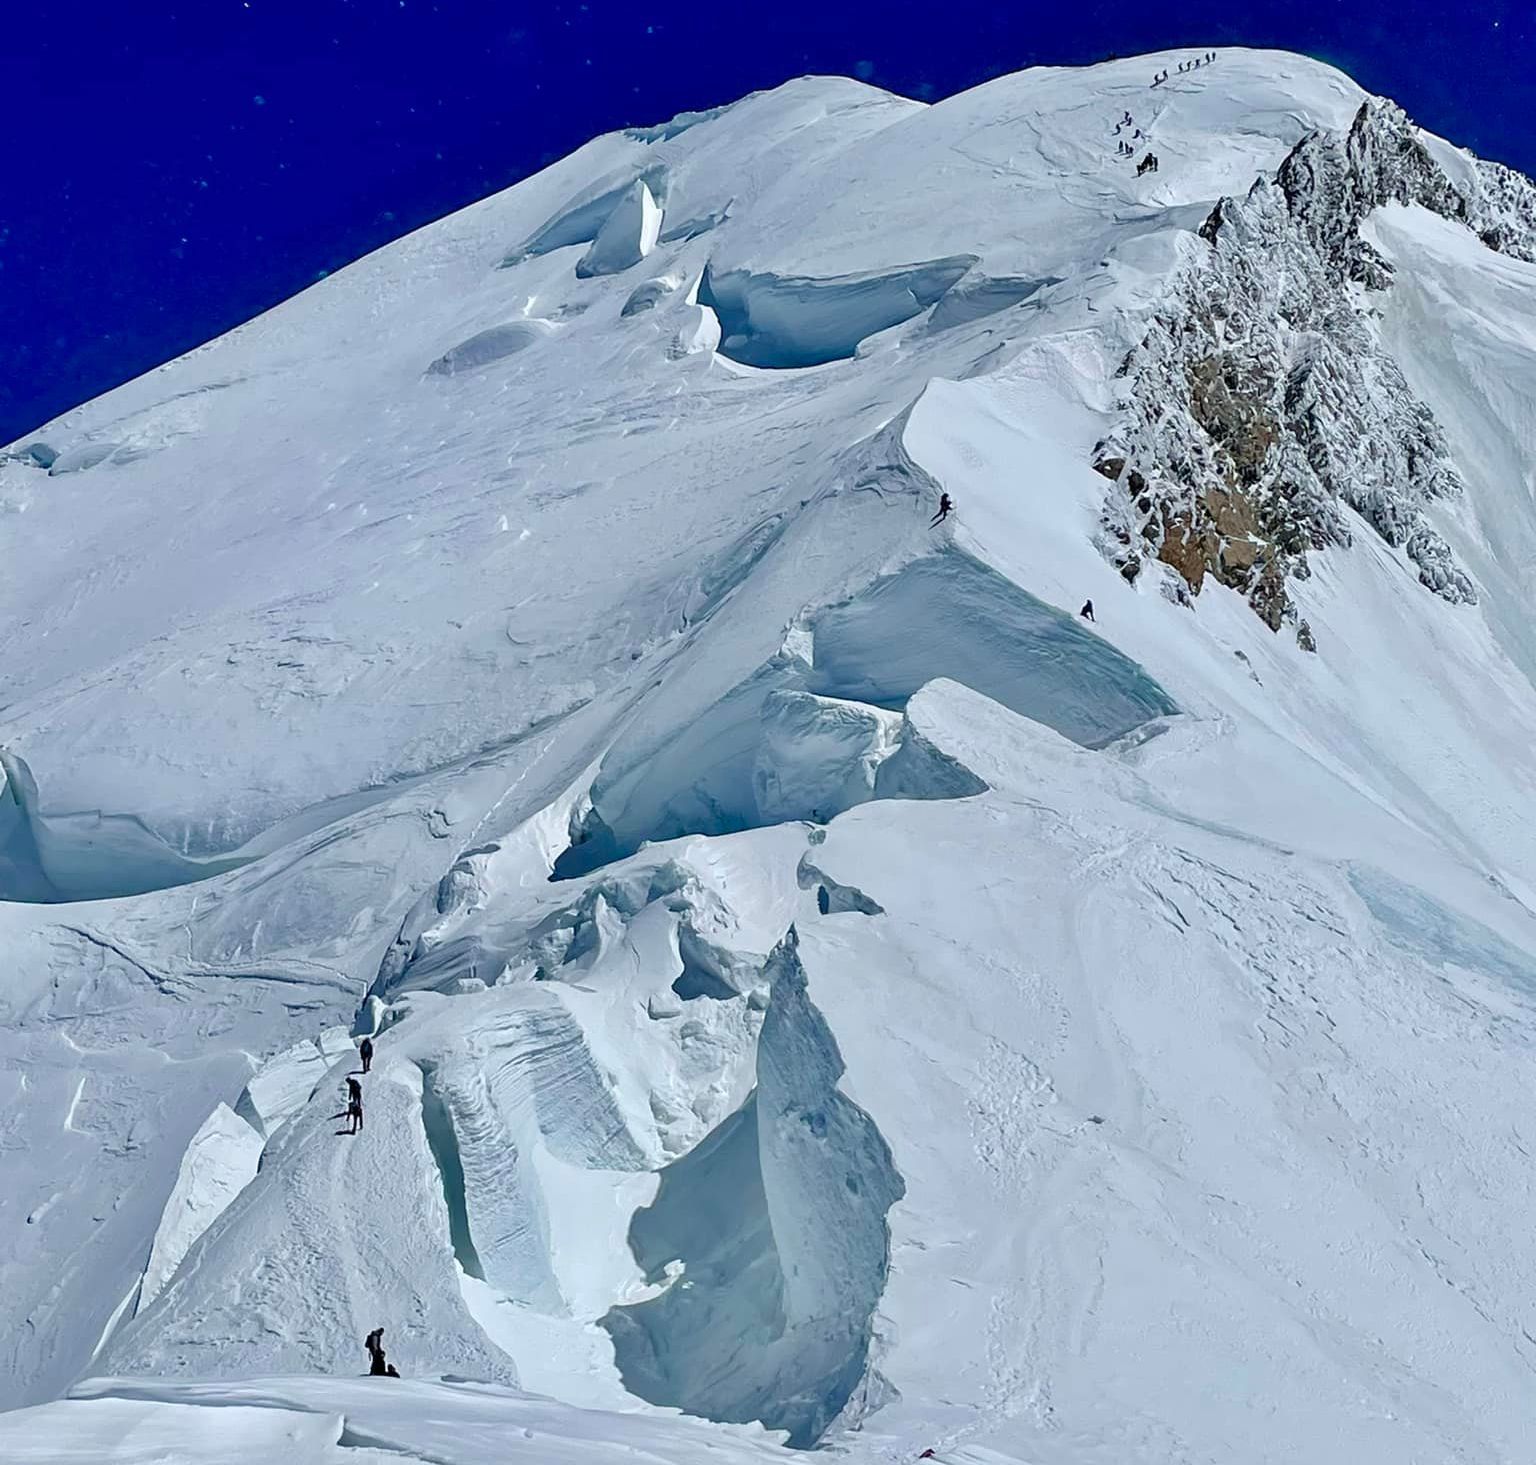 Crevasses on Normal route of ascent on Mont Blanc